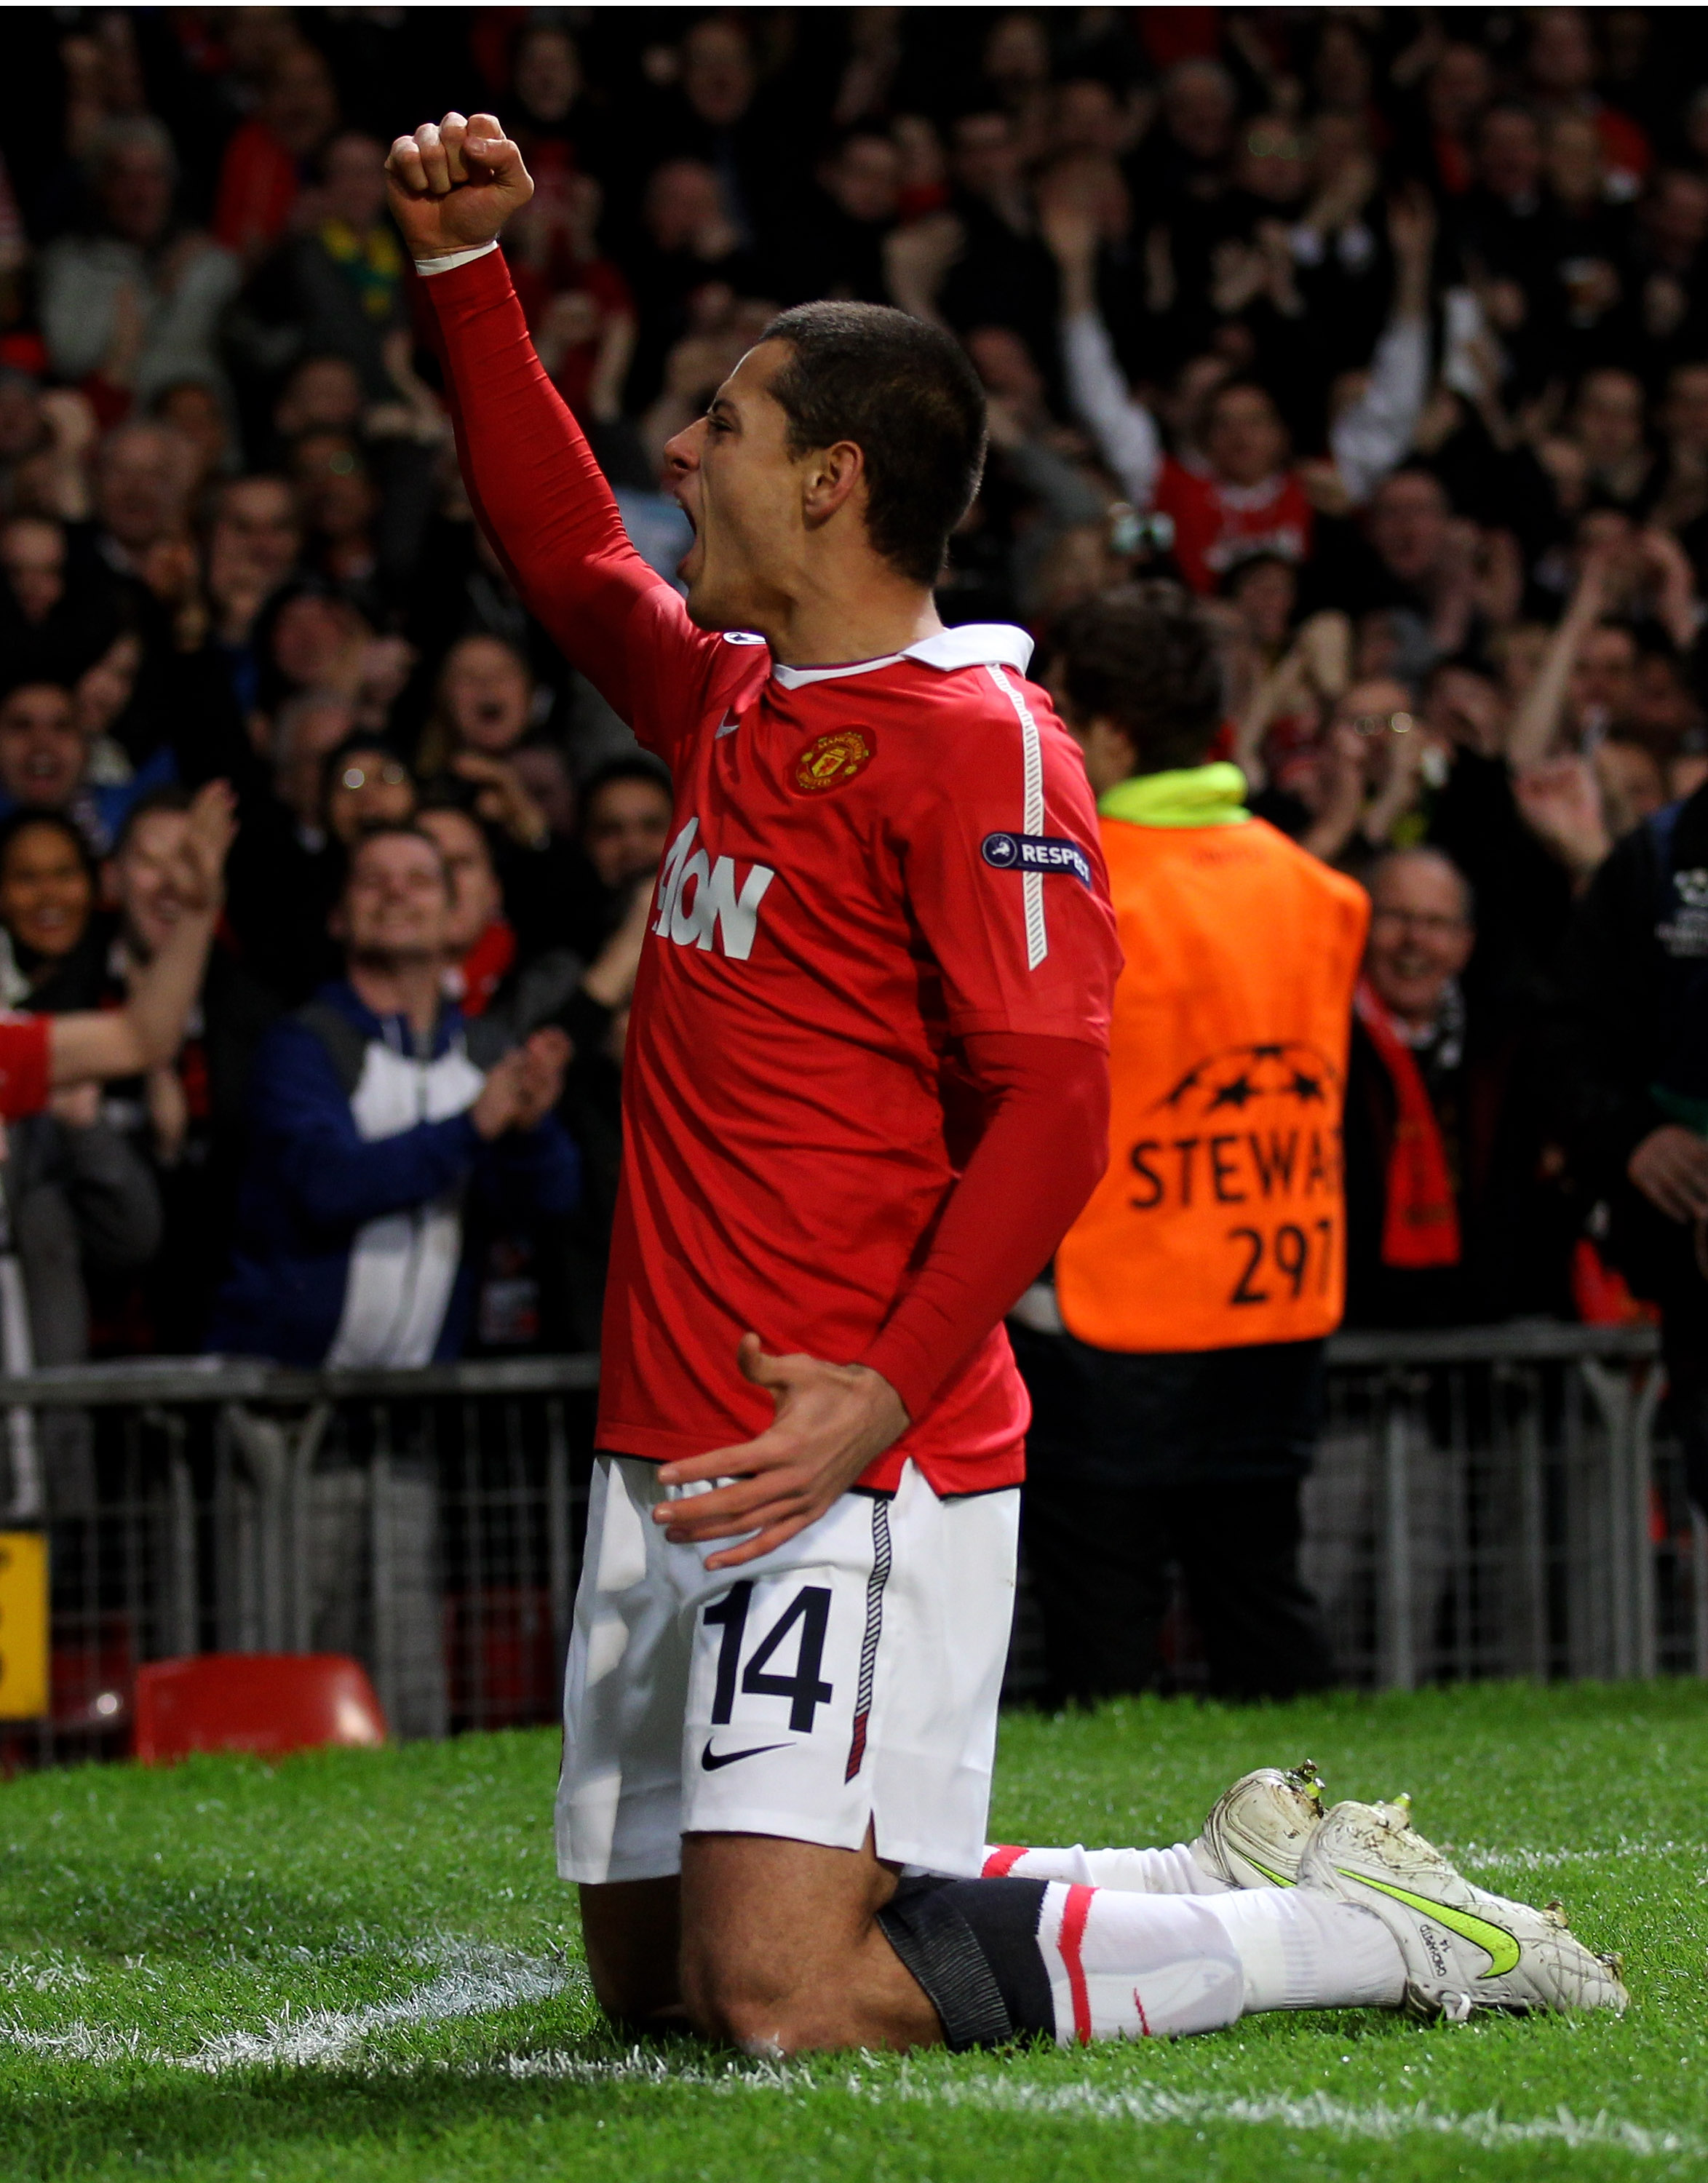 MANCHESTER, ENGLAND - MARCH 15:  Javier Hernandez of Manchester United celebrates scoring the opening goal during the UEFA Champions League round of 16 second leg match between Manchester United and Marseille at Old Trafford on March 15, 2011 in Mancheste